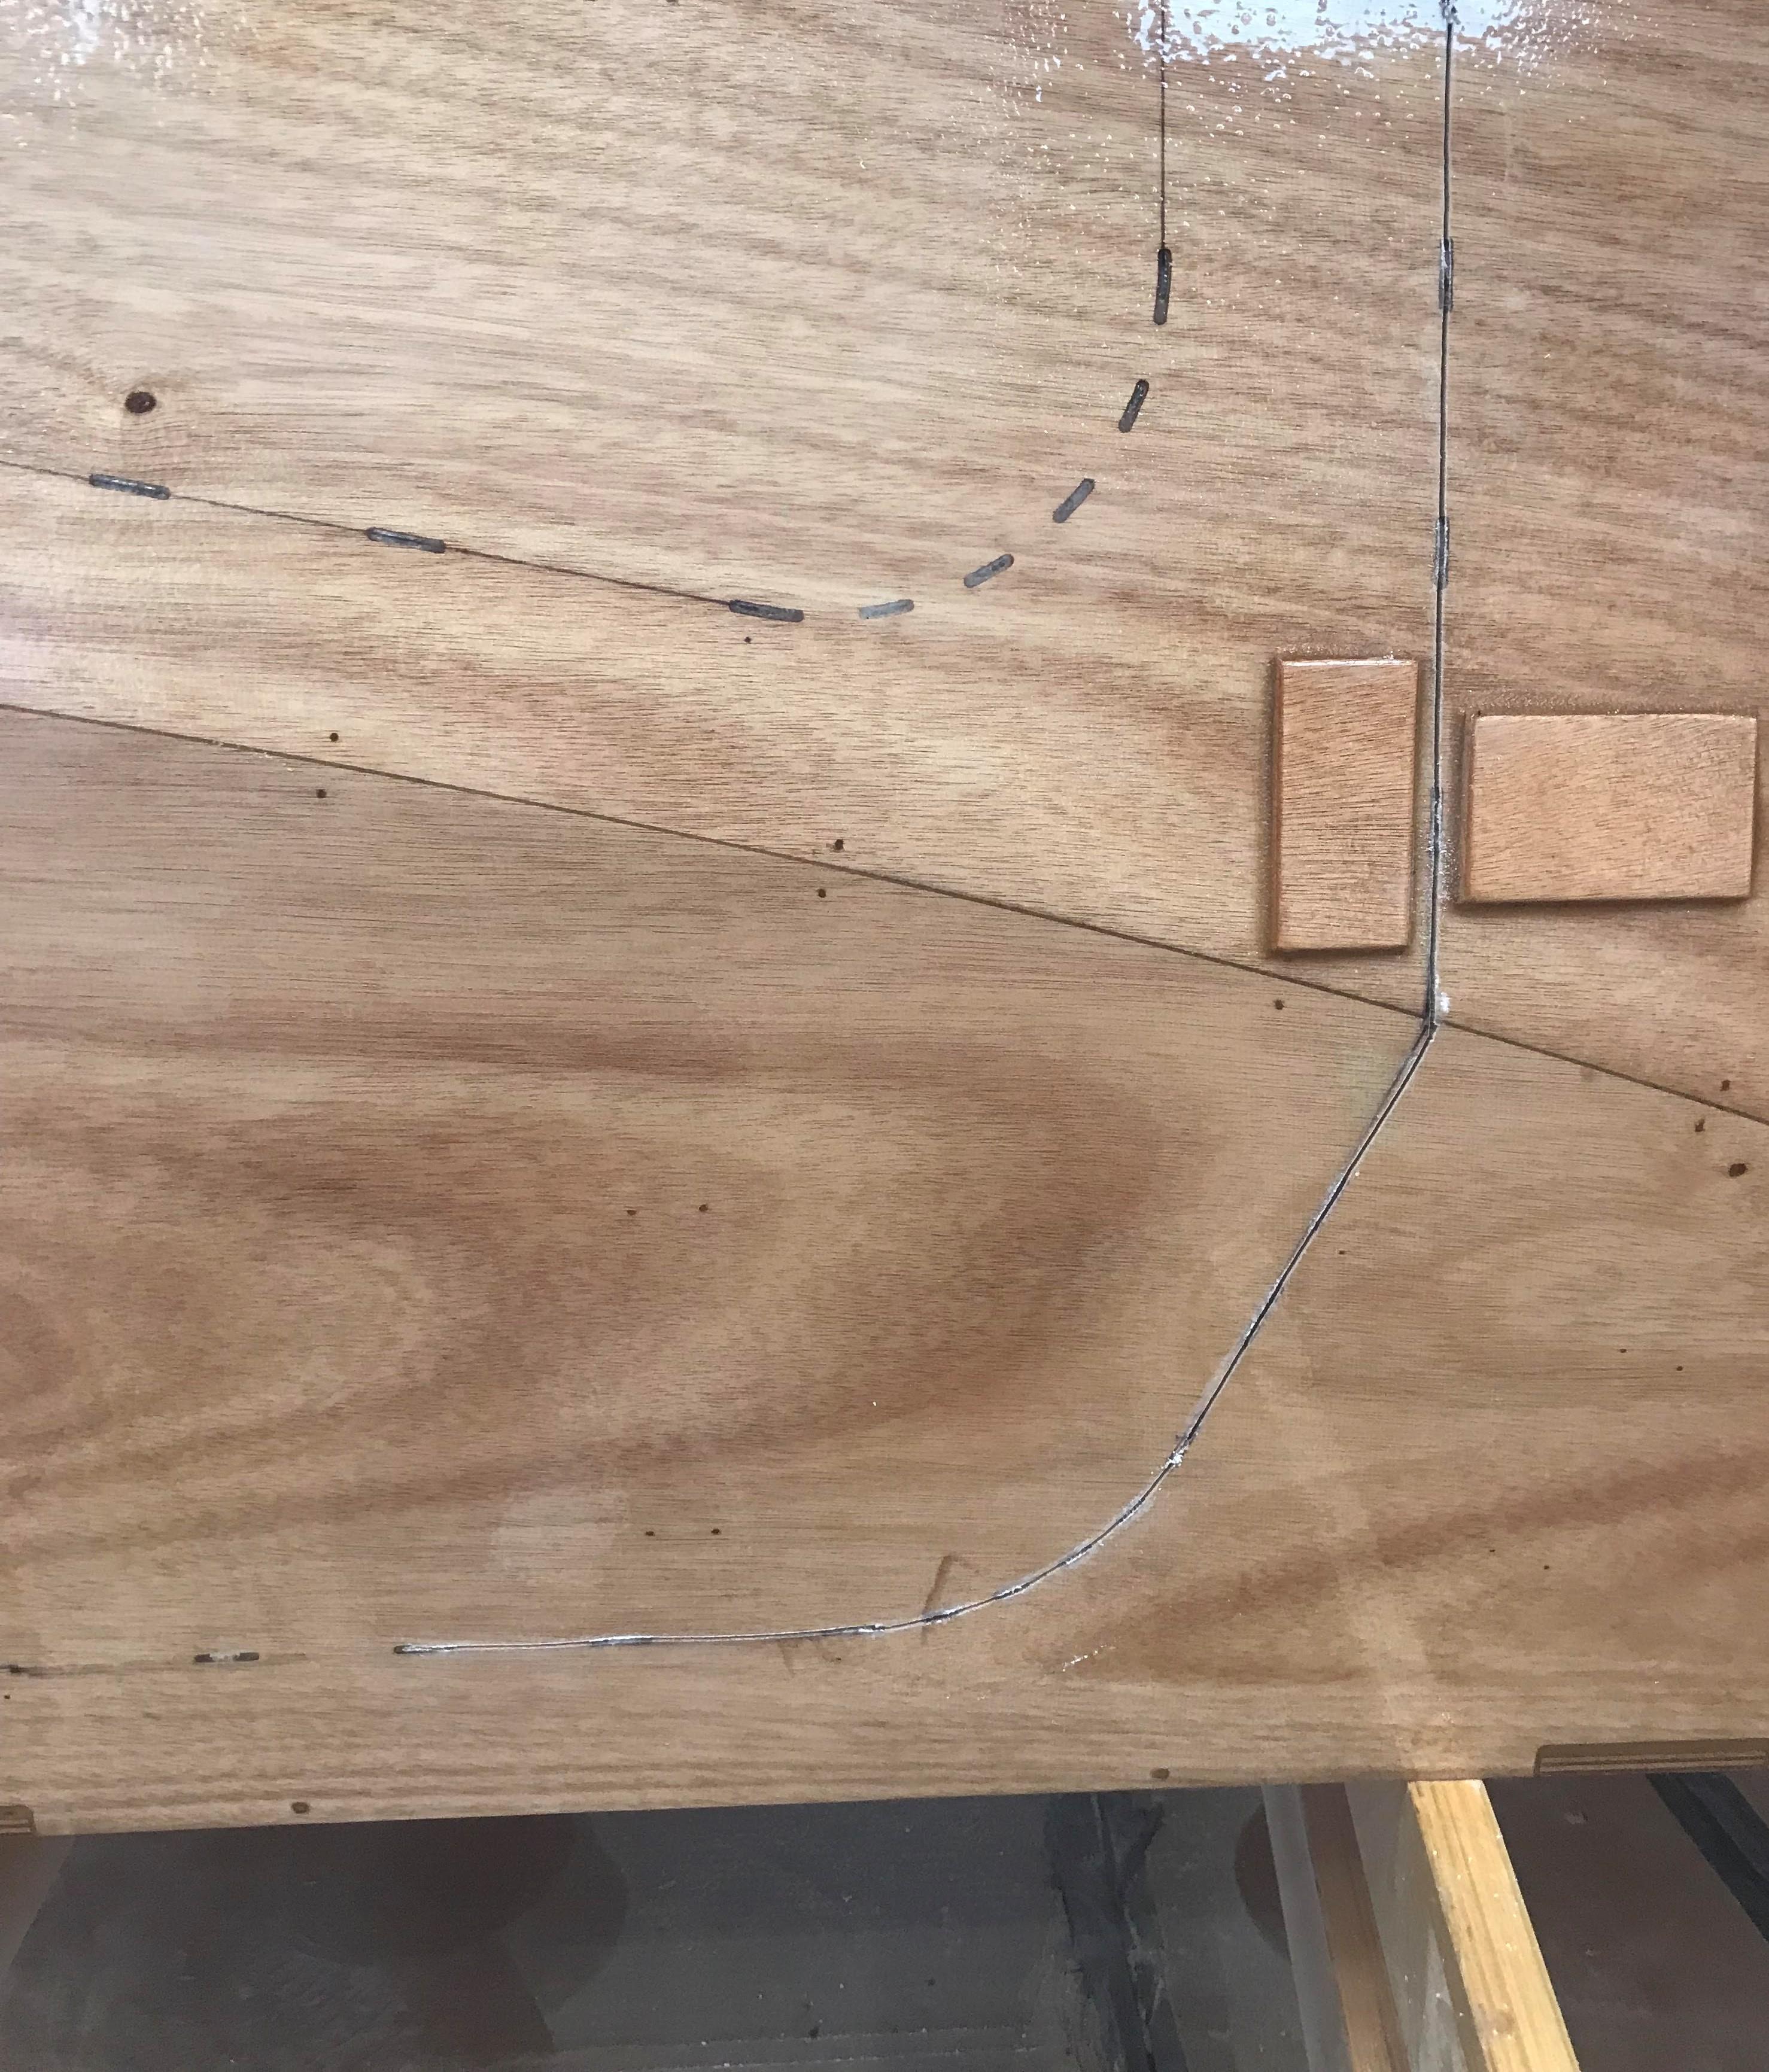 Cut line on door with modified jigsaw